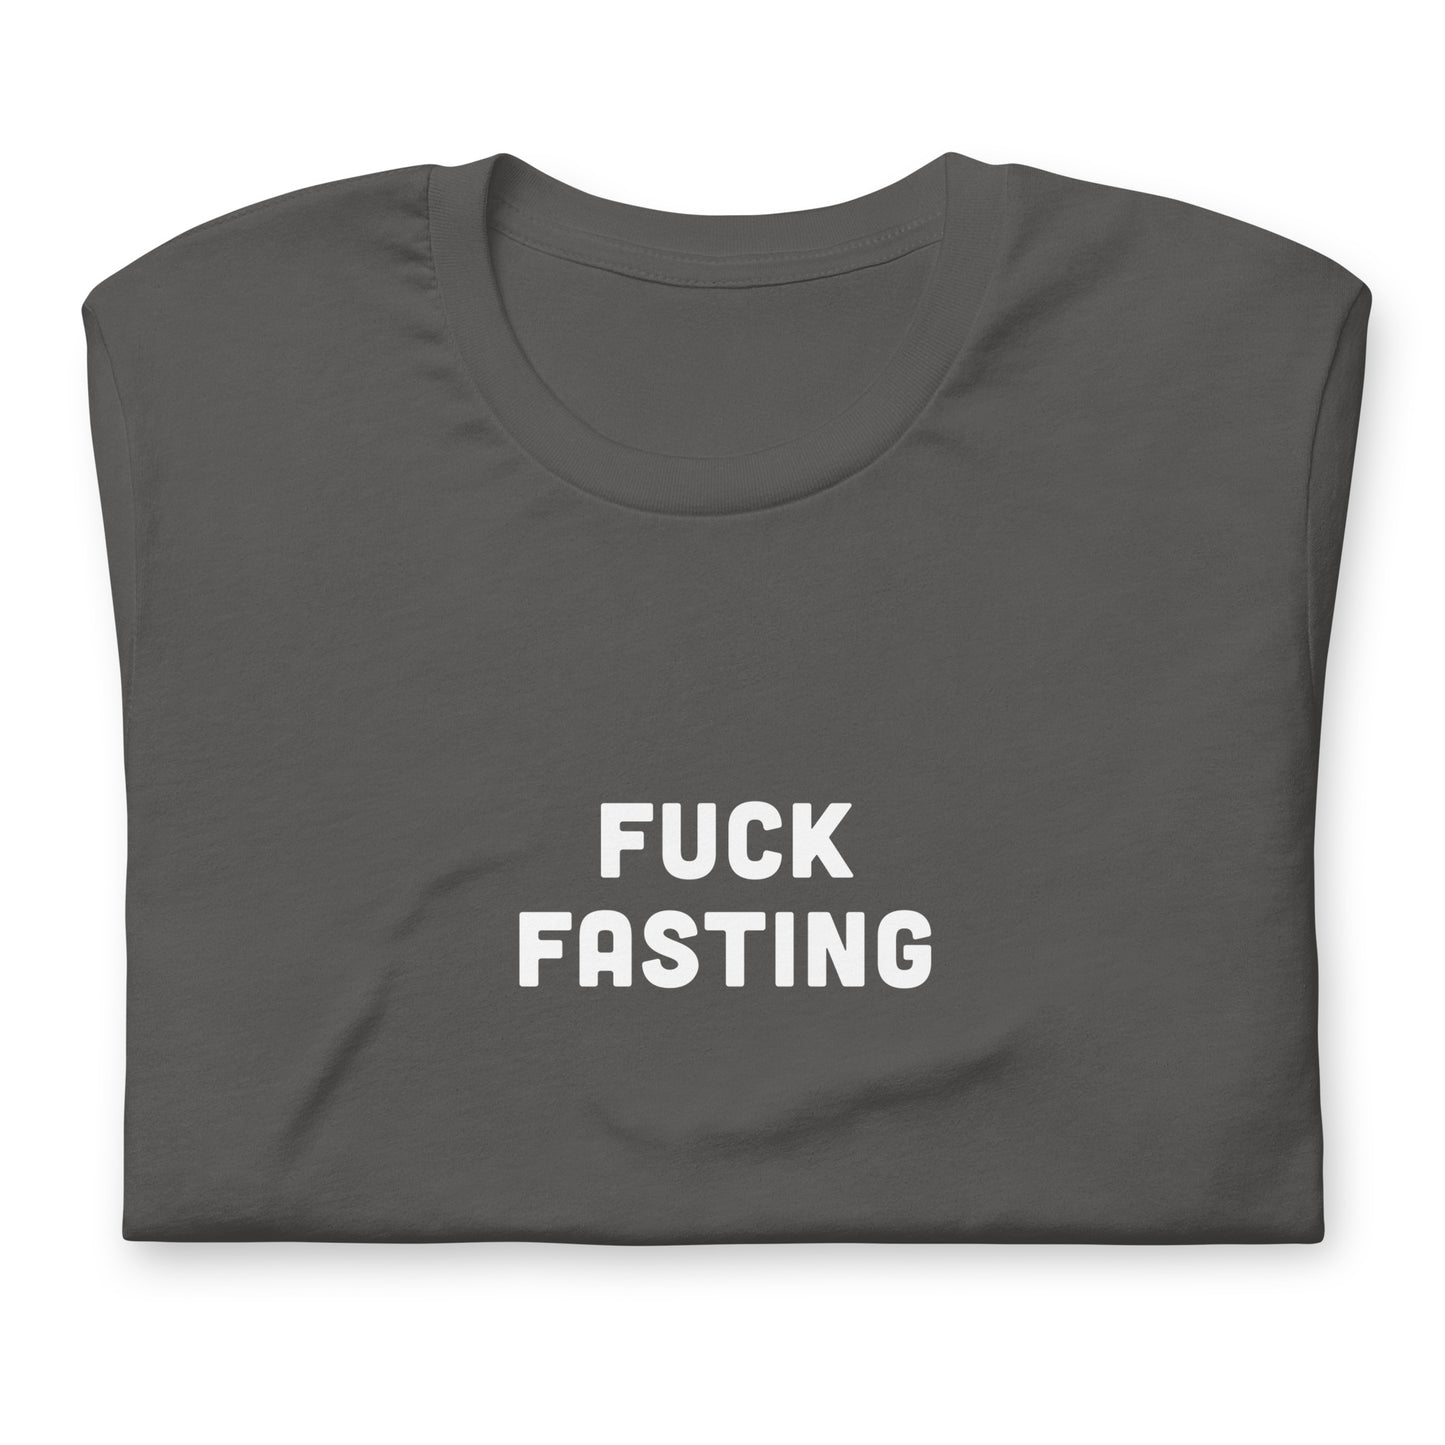 Fuck Fasting T-Shirt Size 2XL Color Black